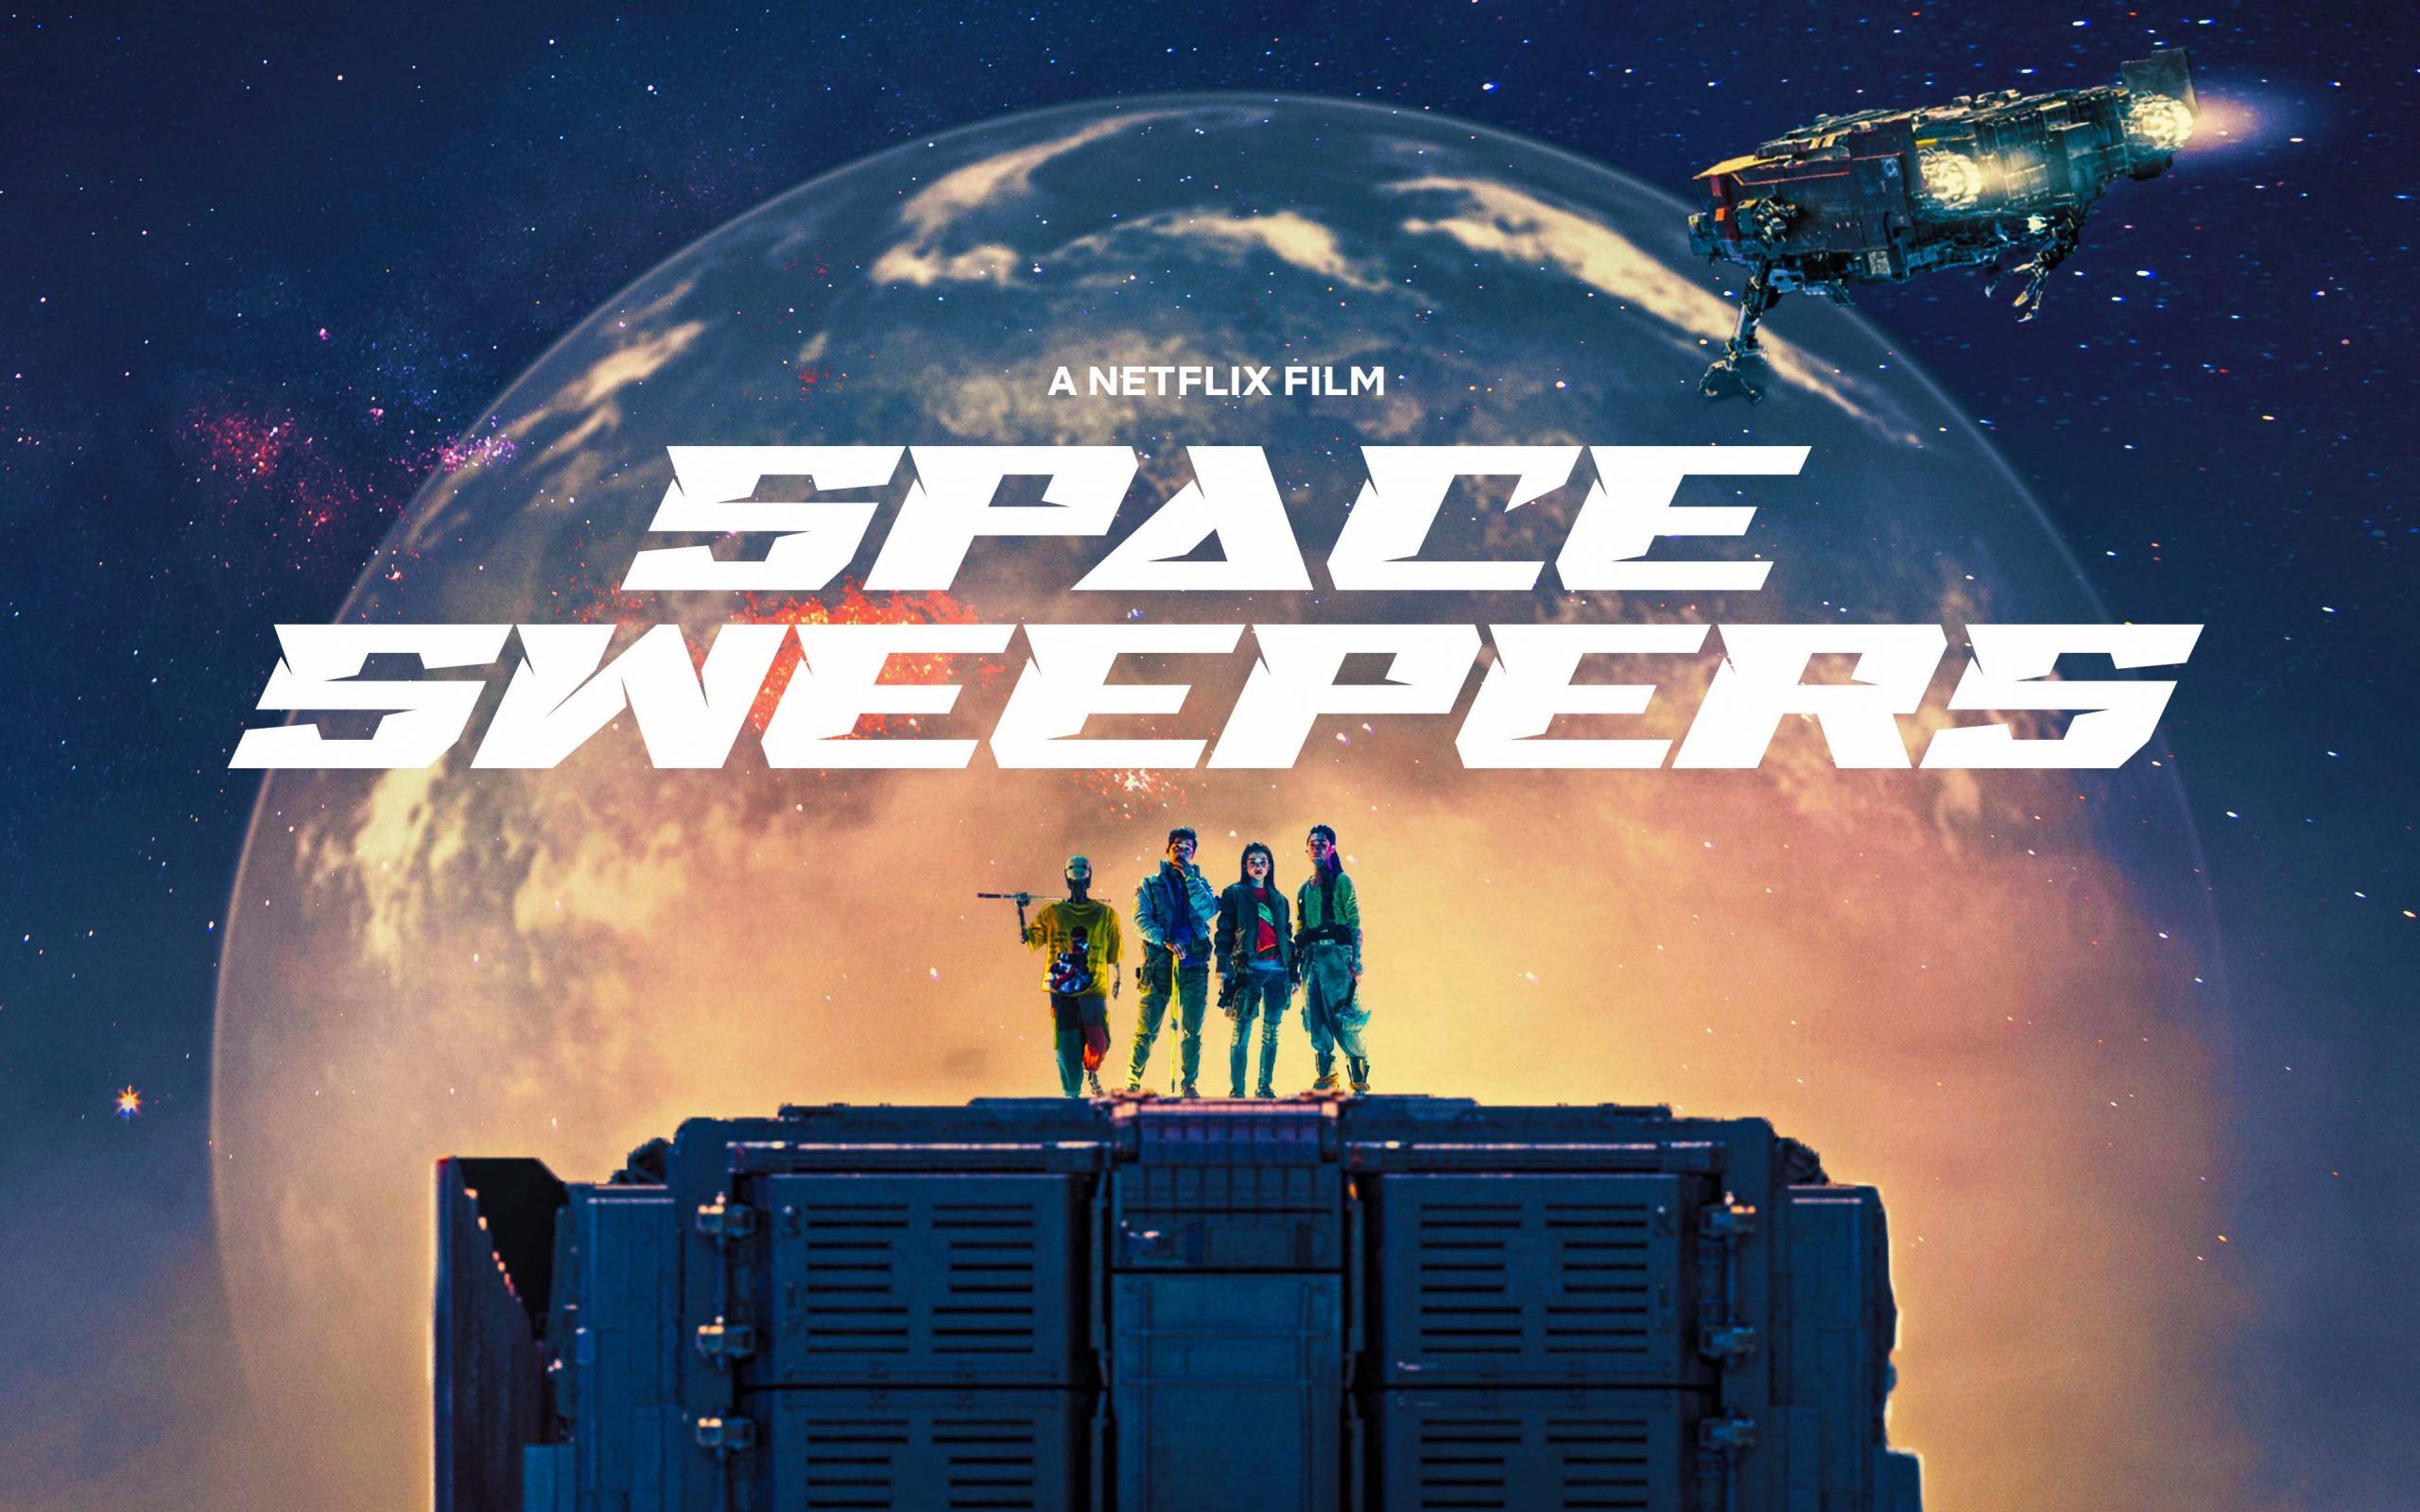 Netflix Slates Release For Korean Sci Fi Film 'Space Sweepers'